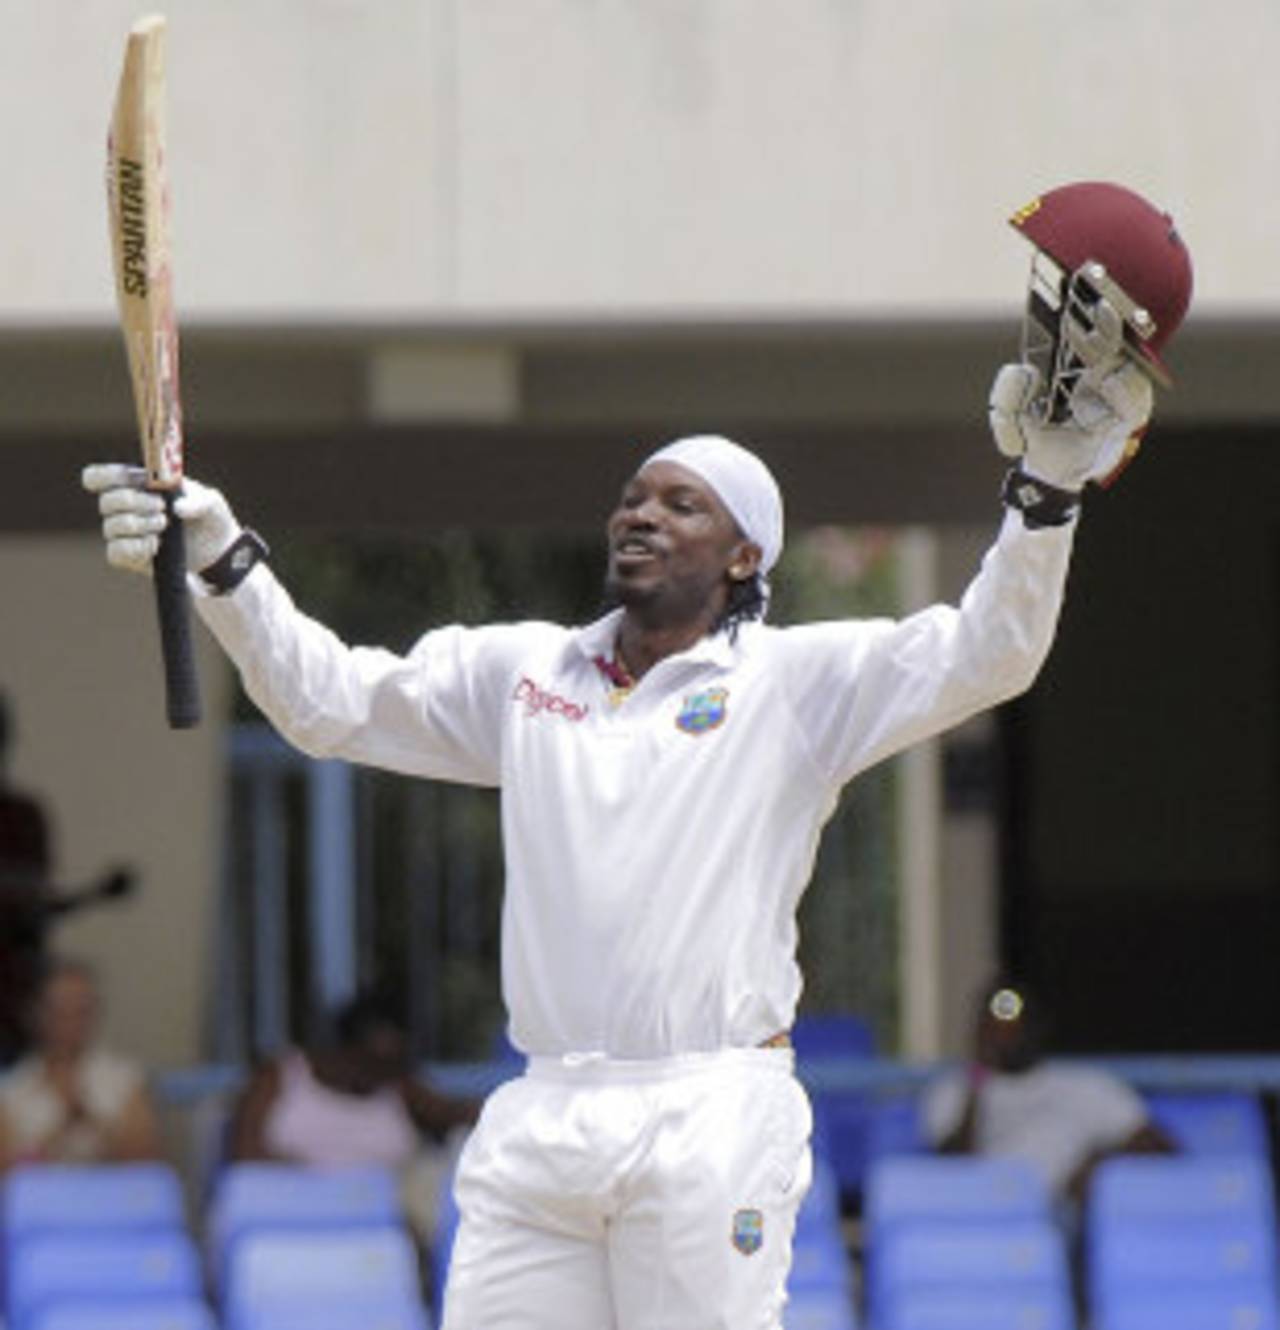 Chris Gayle celebrates his 14th Test century, West Indies v New Zealand, 1st Test, Antigua, 3rd day, July 27, 2012